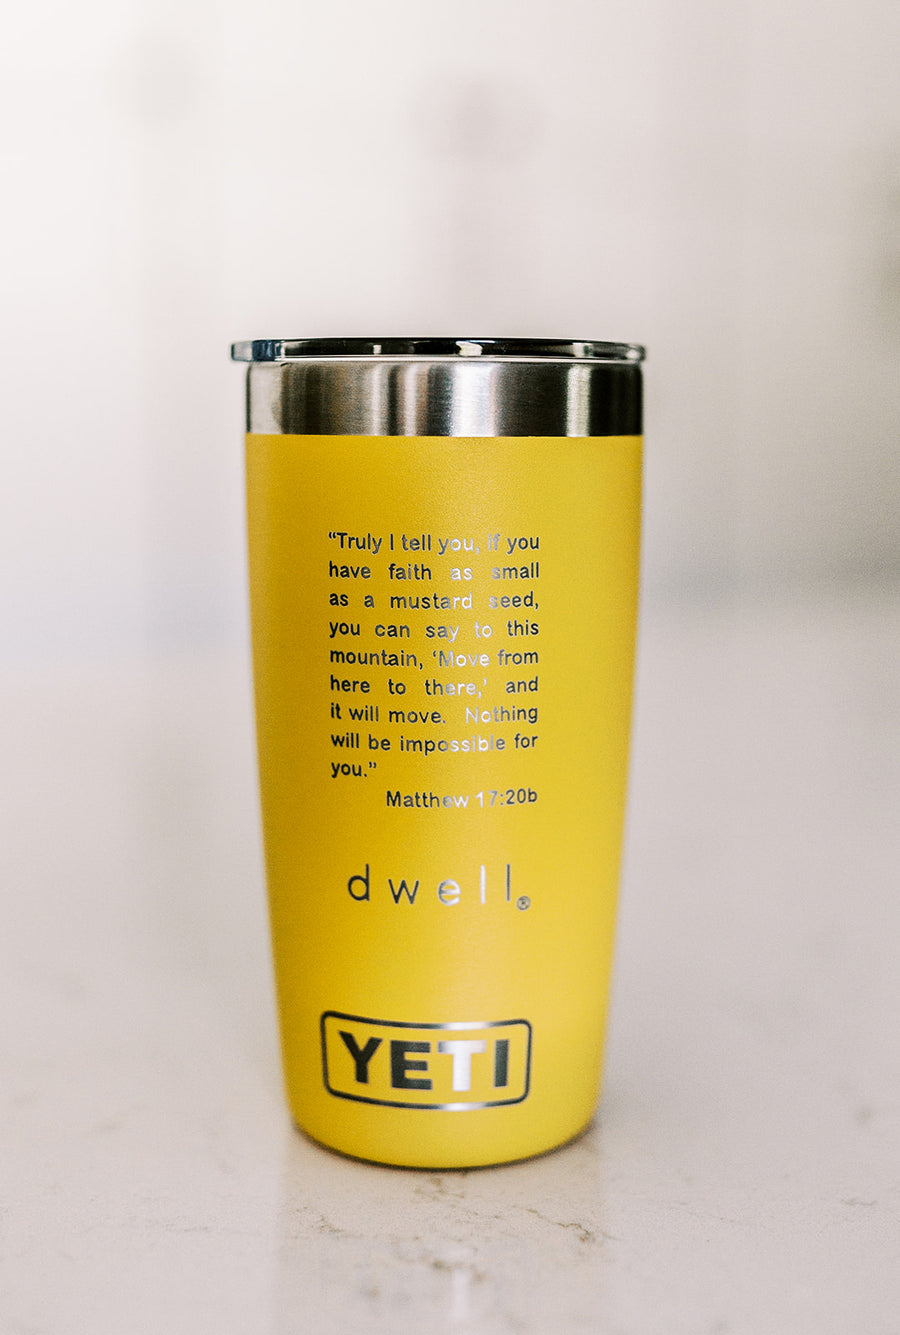 I thought YETI Tumblers were BIFL, but what's happening here? The